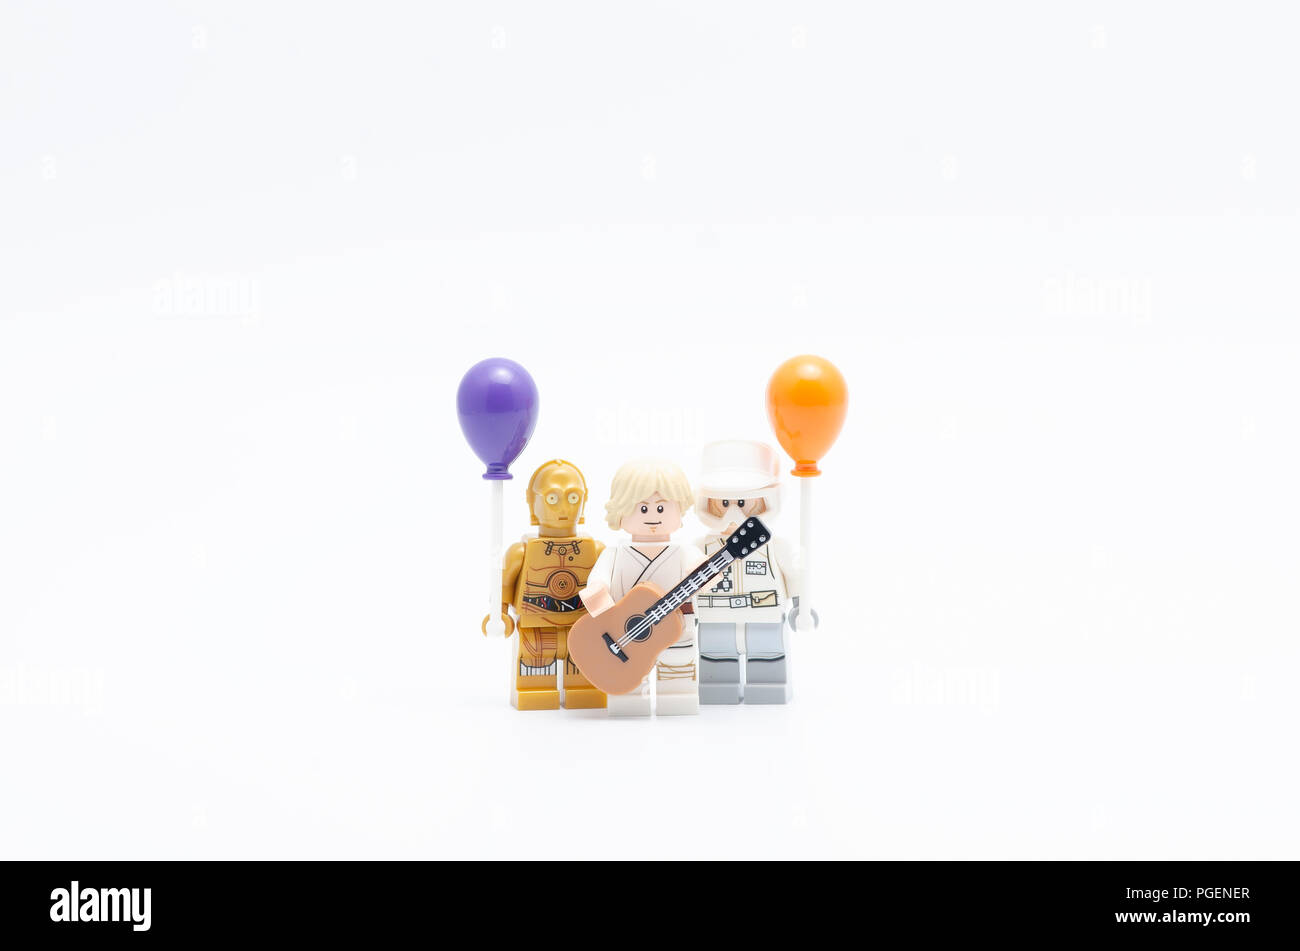 Lego luke skywalker holding guitar with rebel army and c3p0 holding balloon. Stock Photo